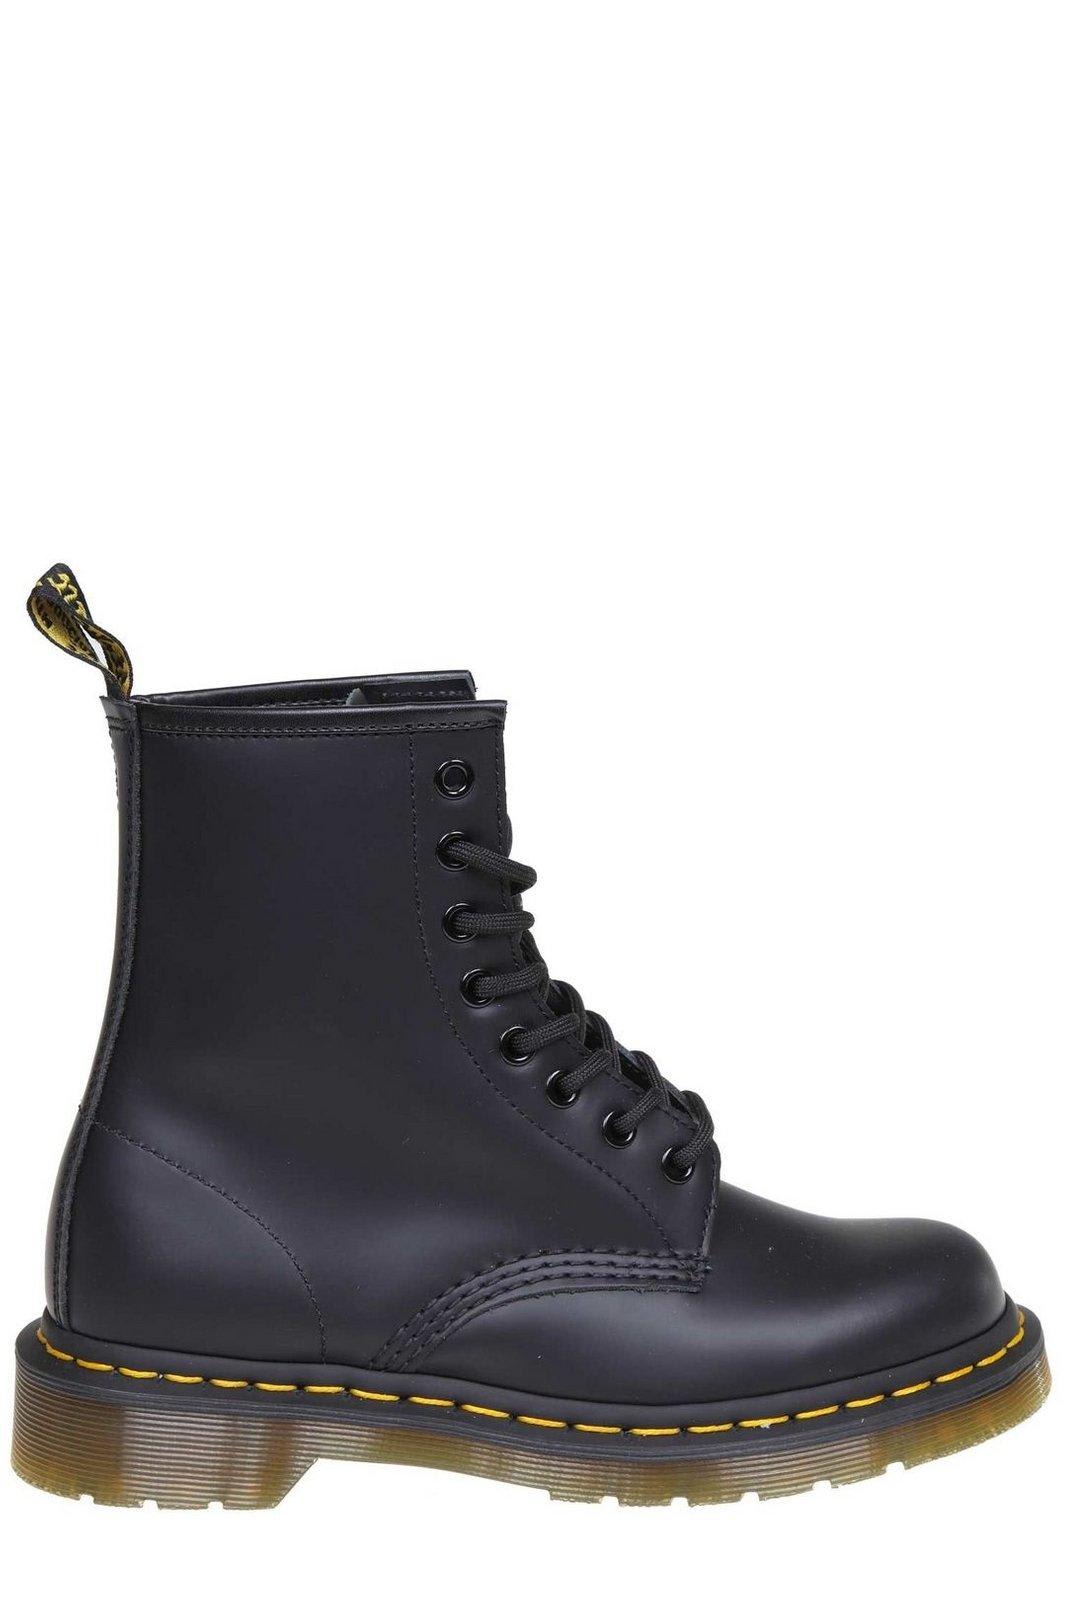 DR. MARTENS' 1460 ROUND TOE ANKLE BOOTS